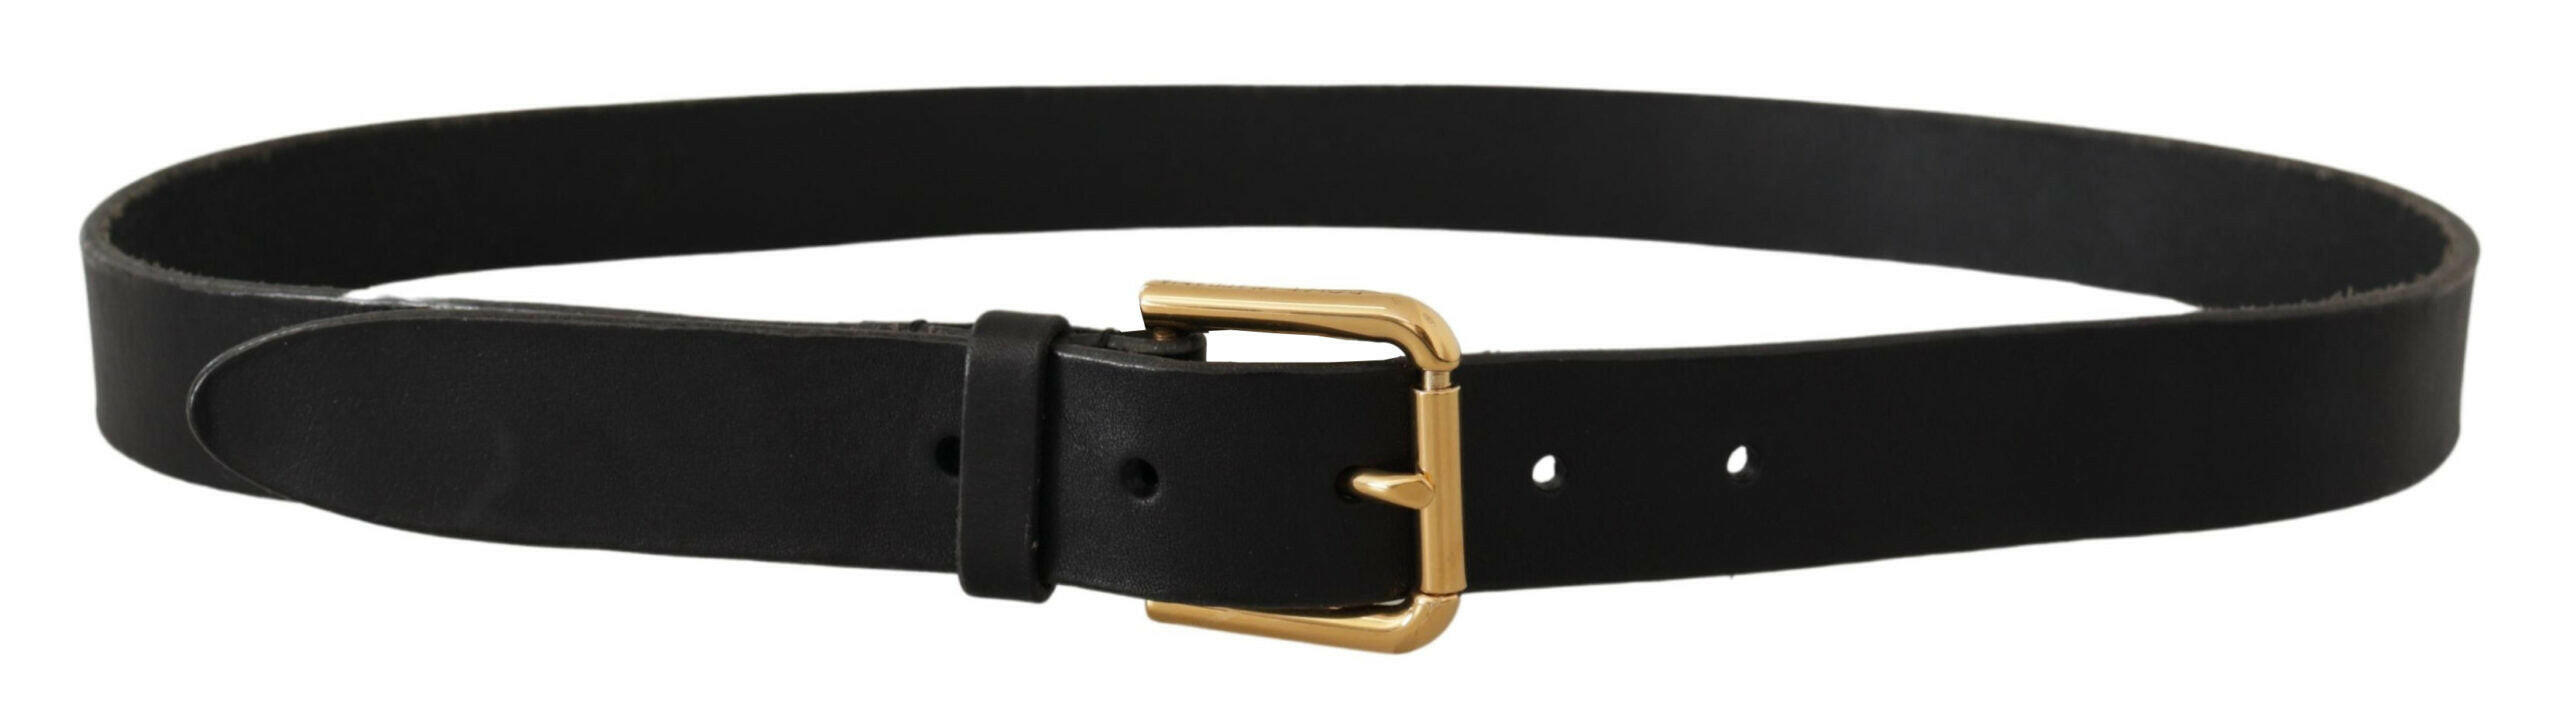 Dolce & Gabbana Brown Classic Leather Gold Metal Buckle Belt - GENUINE AUTHENTIC BRAND LLC  